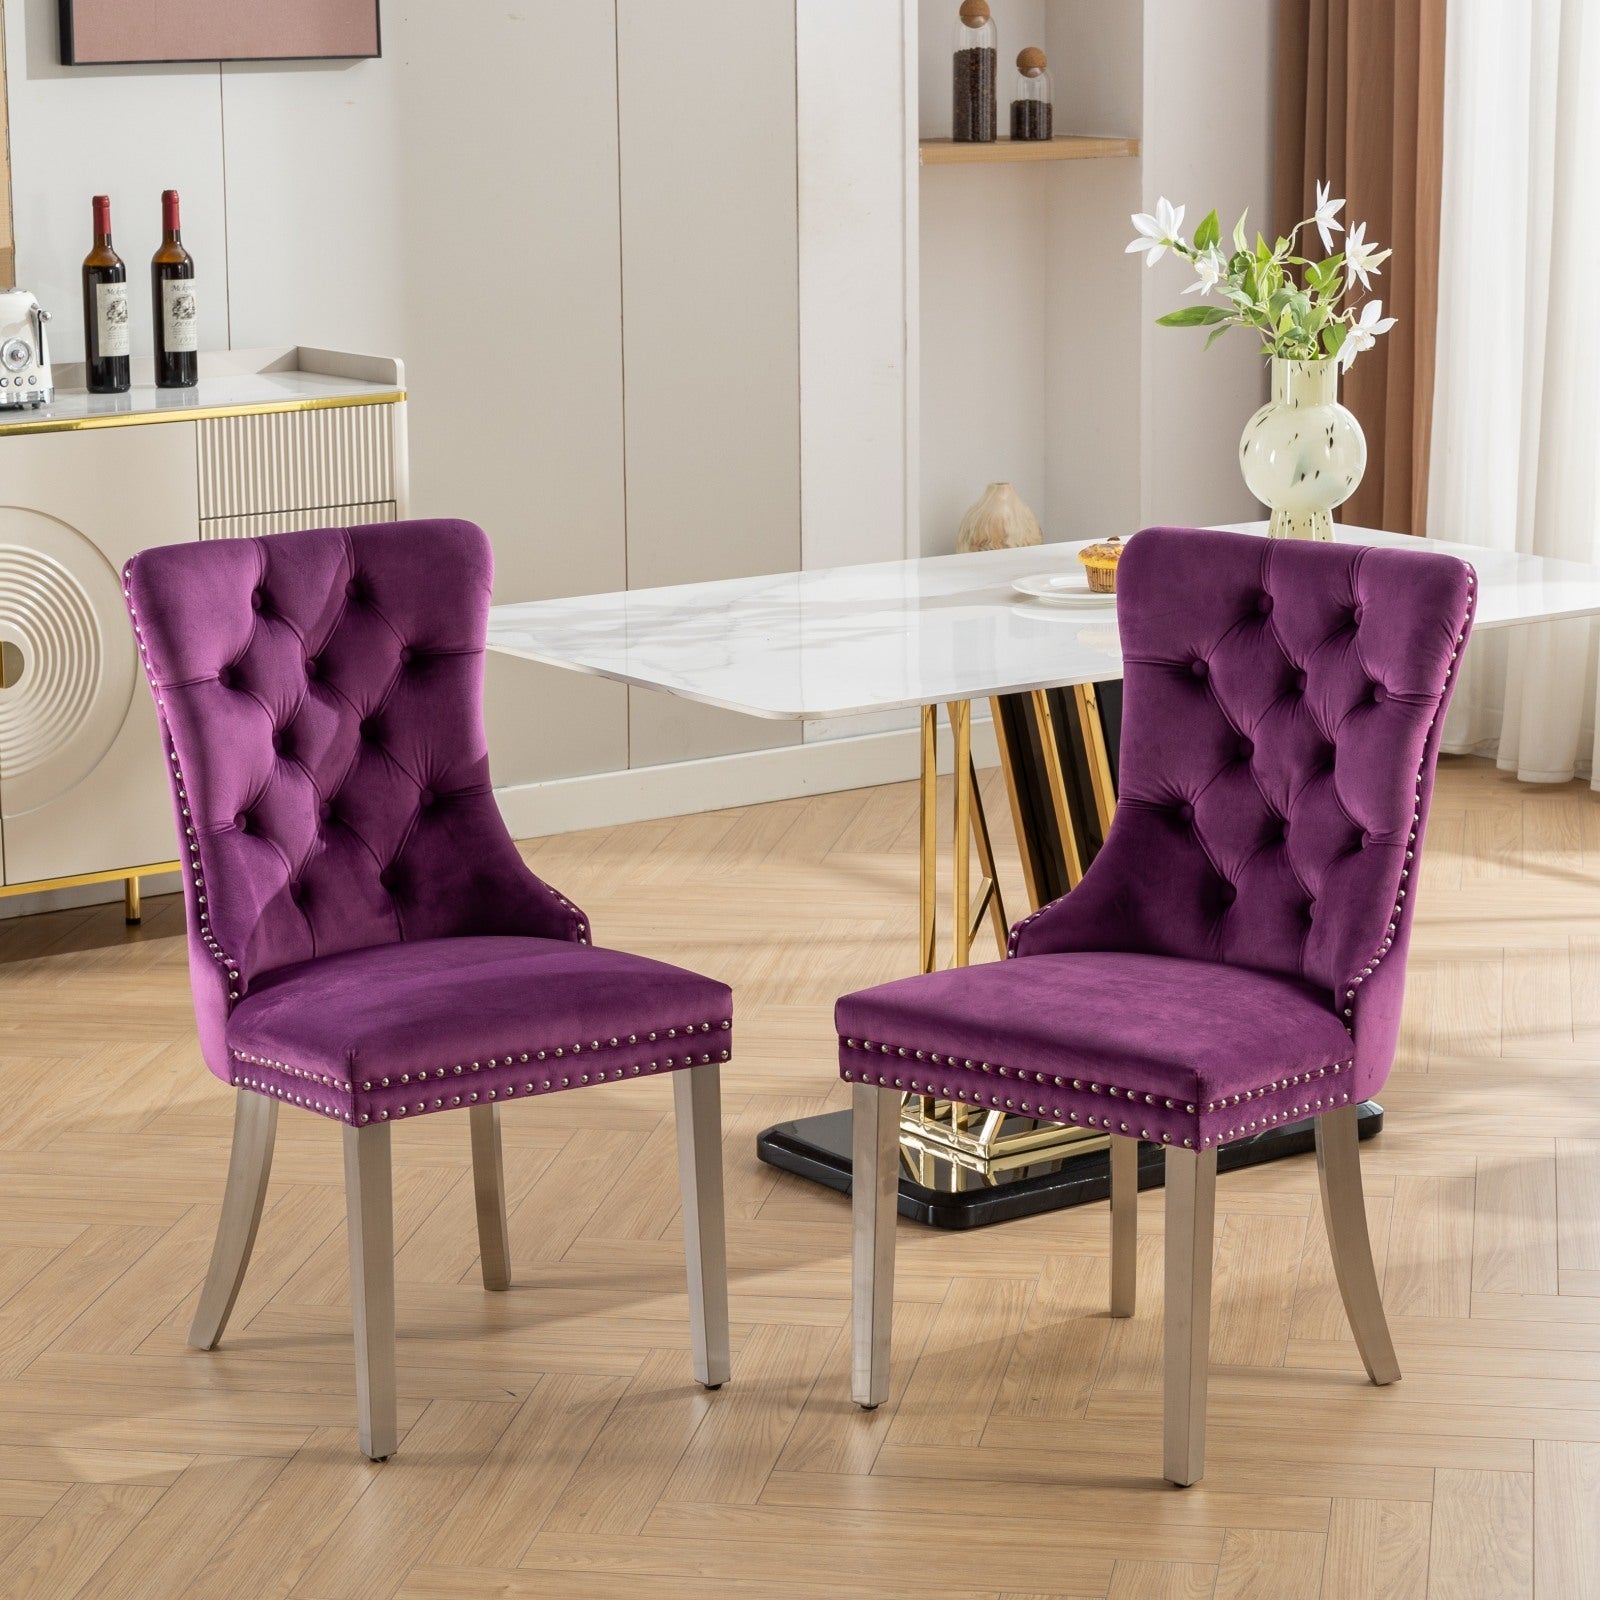 🆓🚛 High-End Tufted Solid Wood Contemporary Velvet Upholstered Dining Chair With Chrome Stainless Steel Plating Legs, Nailhead Trim, Set of 2, Purple and Chrome